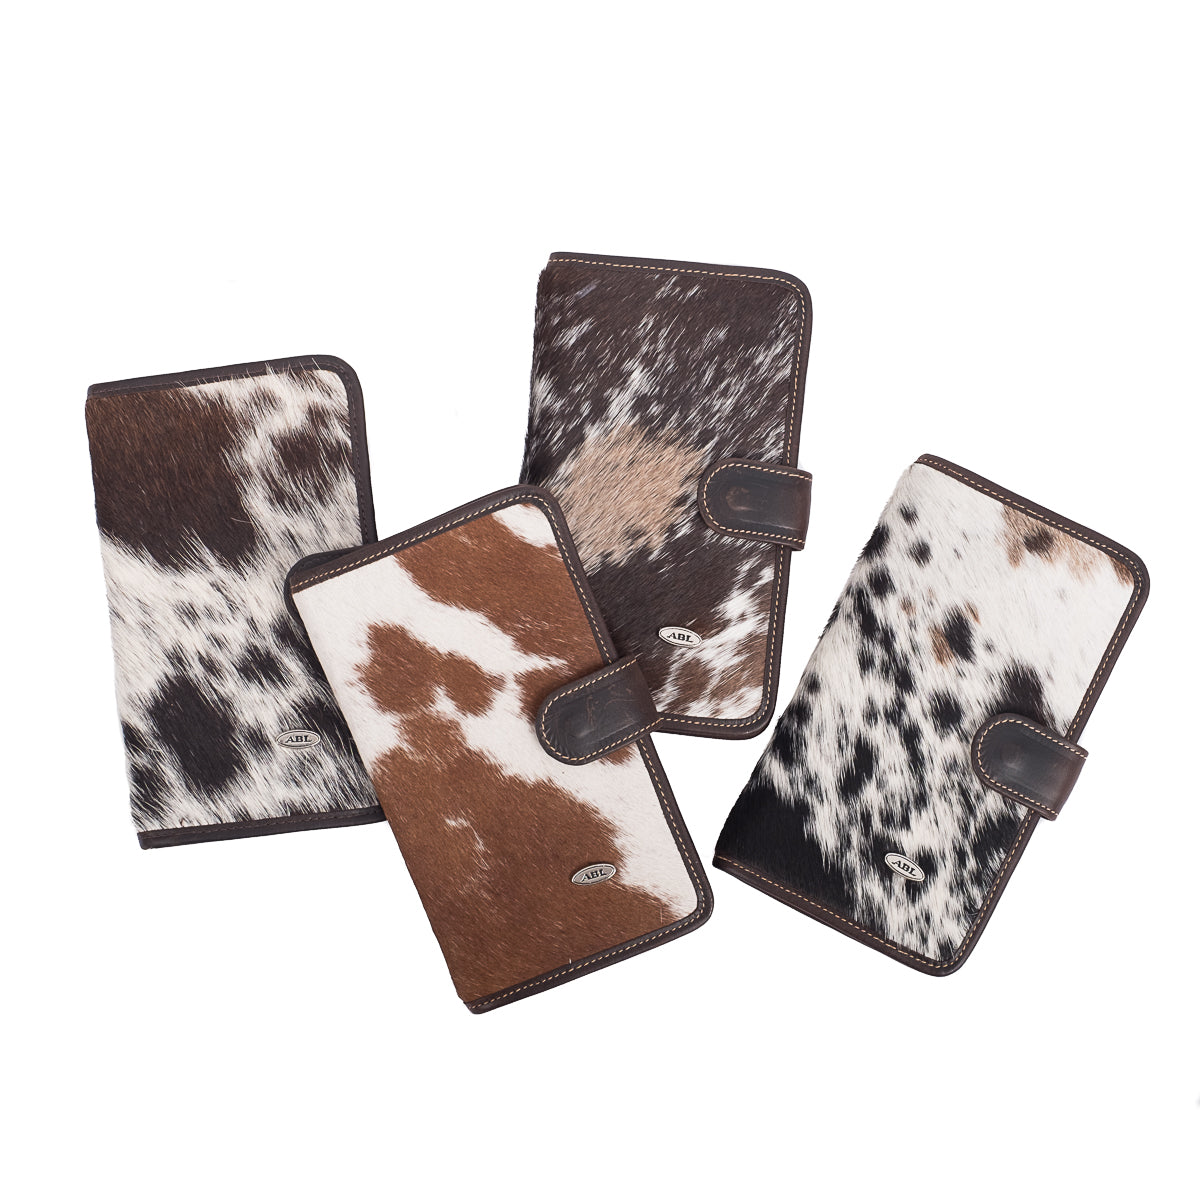 Large Credit Card Wallet - Rawhide - Brown and White– Aussie Bush Leather